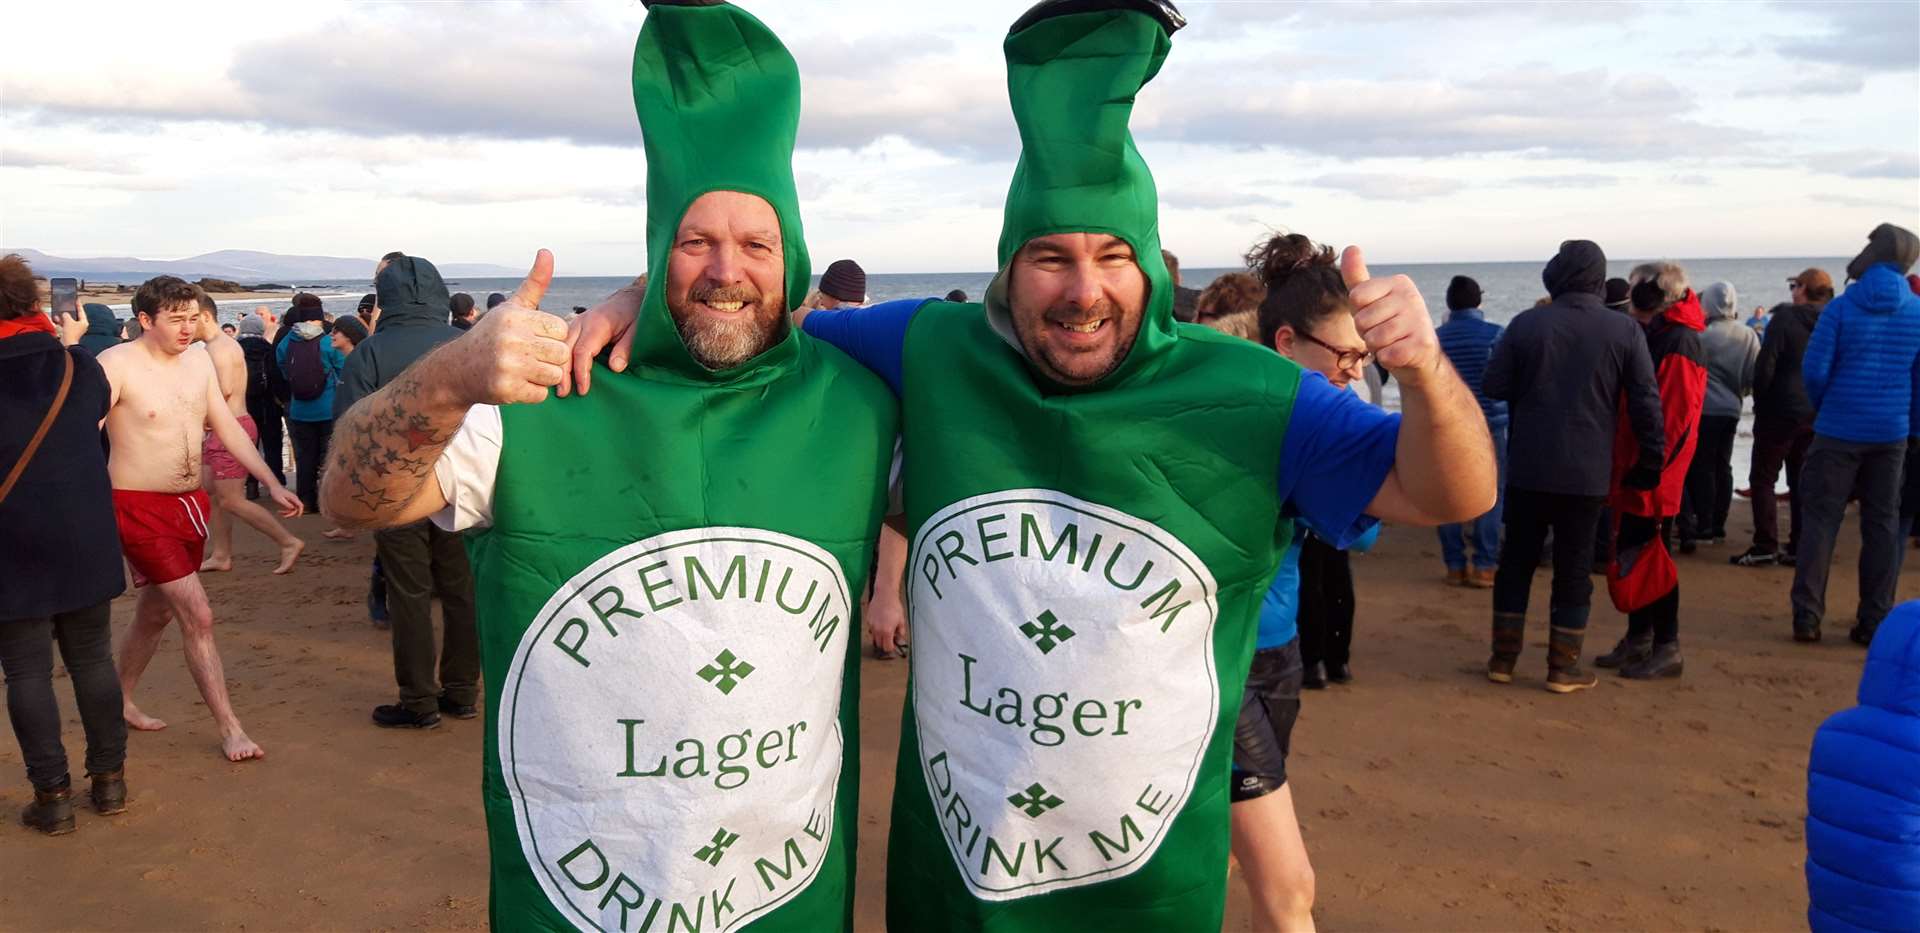 Charlie Stenhouse (left) and Robert Mackenzie, both from Fife, are veterans of Dornoch Loony Dook - this is the 17th time they have taken part. The two, who were dressed as lager cans, raised £408 for charities in their home area through their participation.